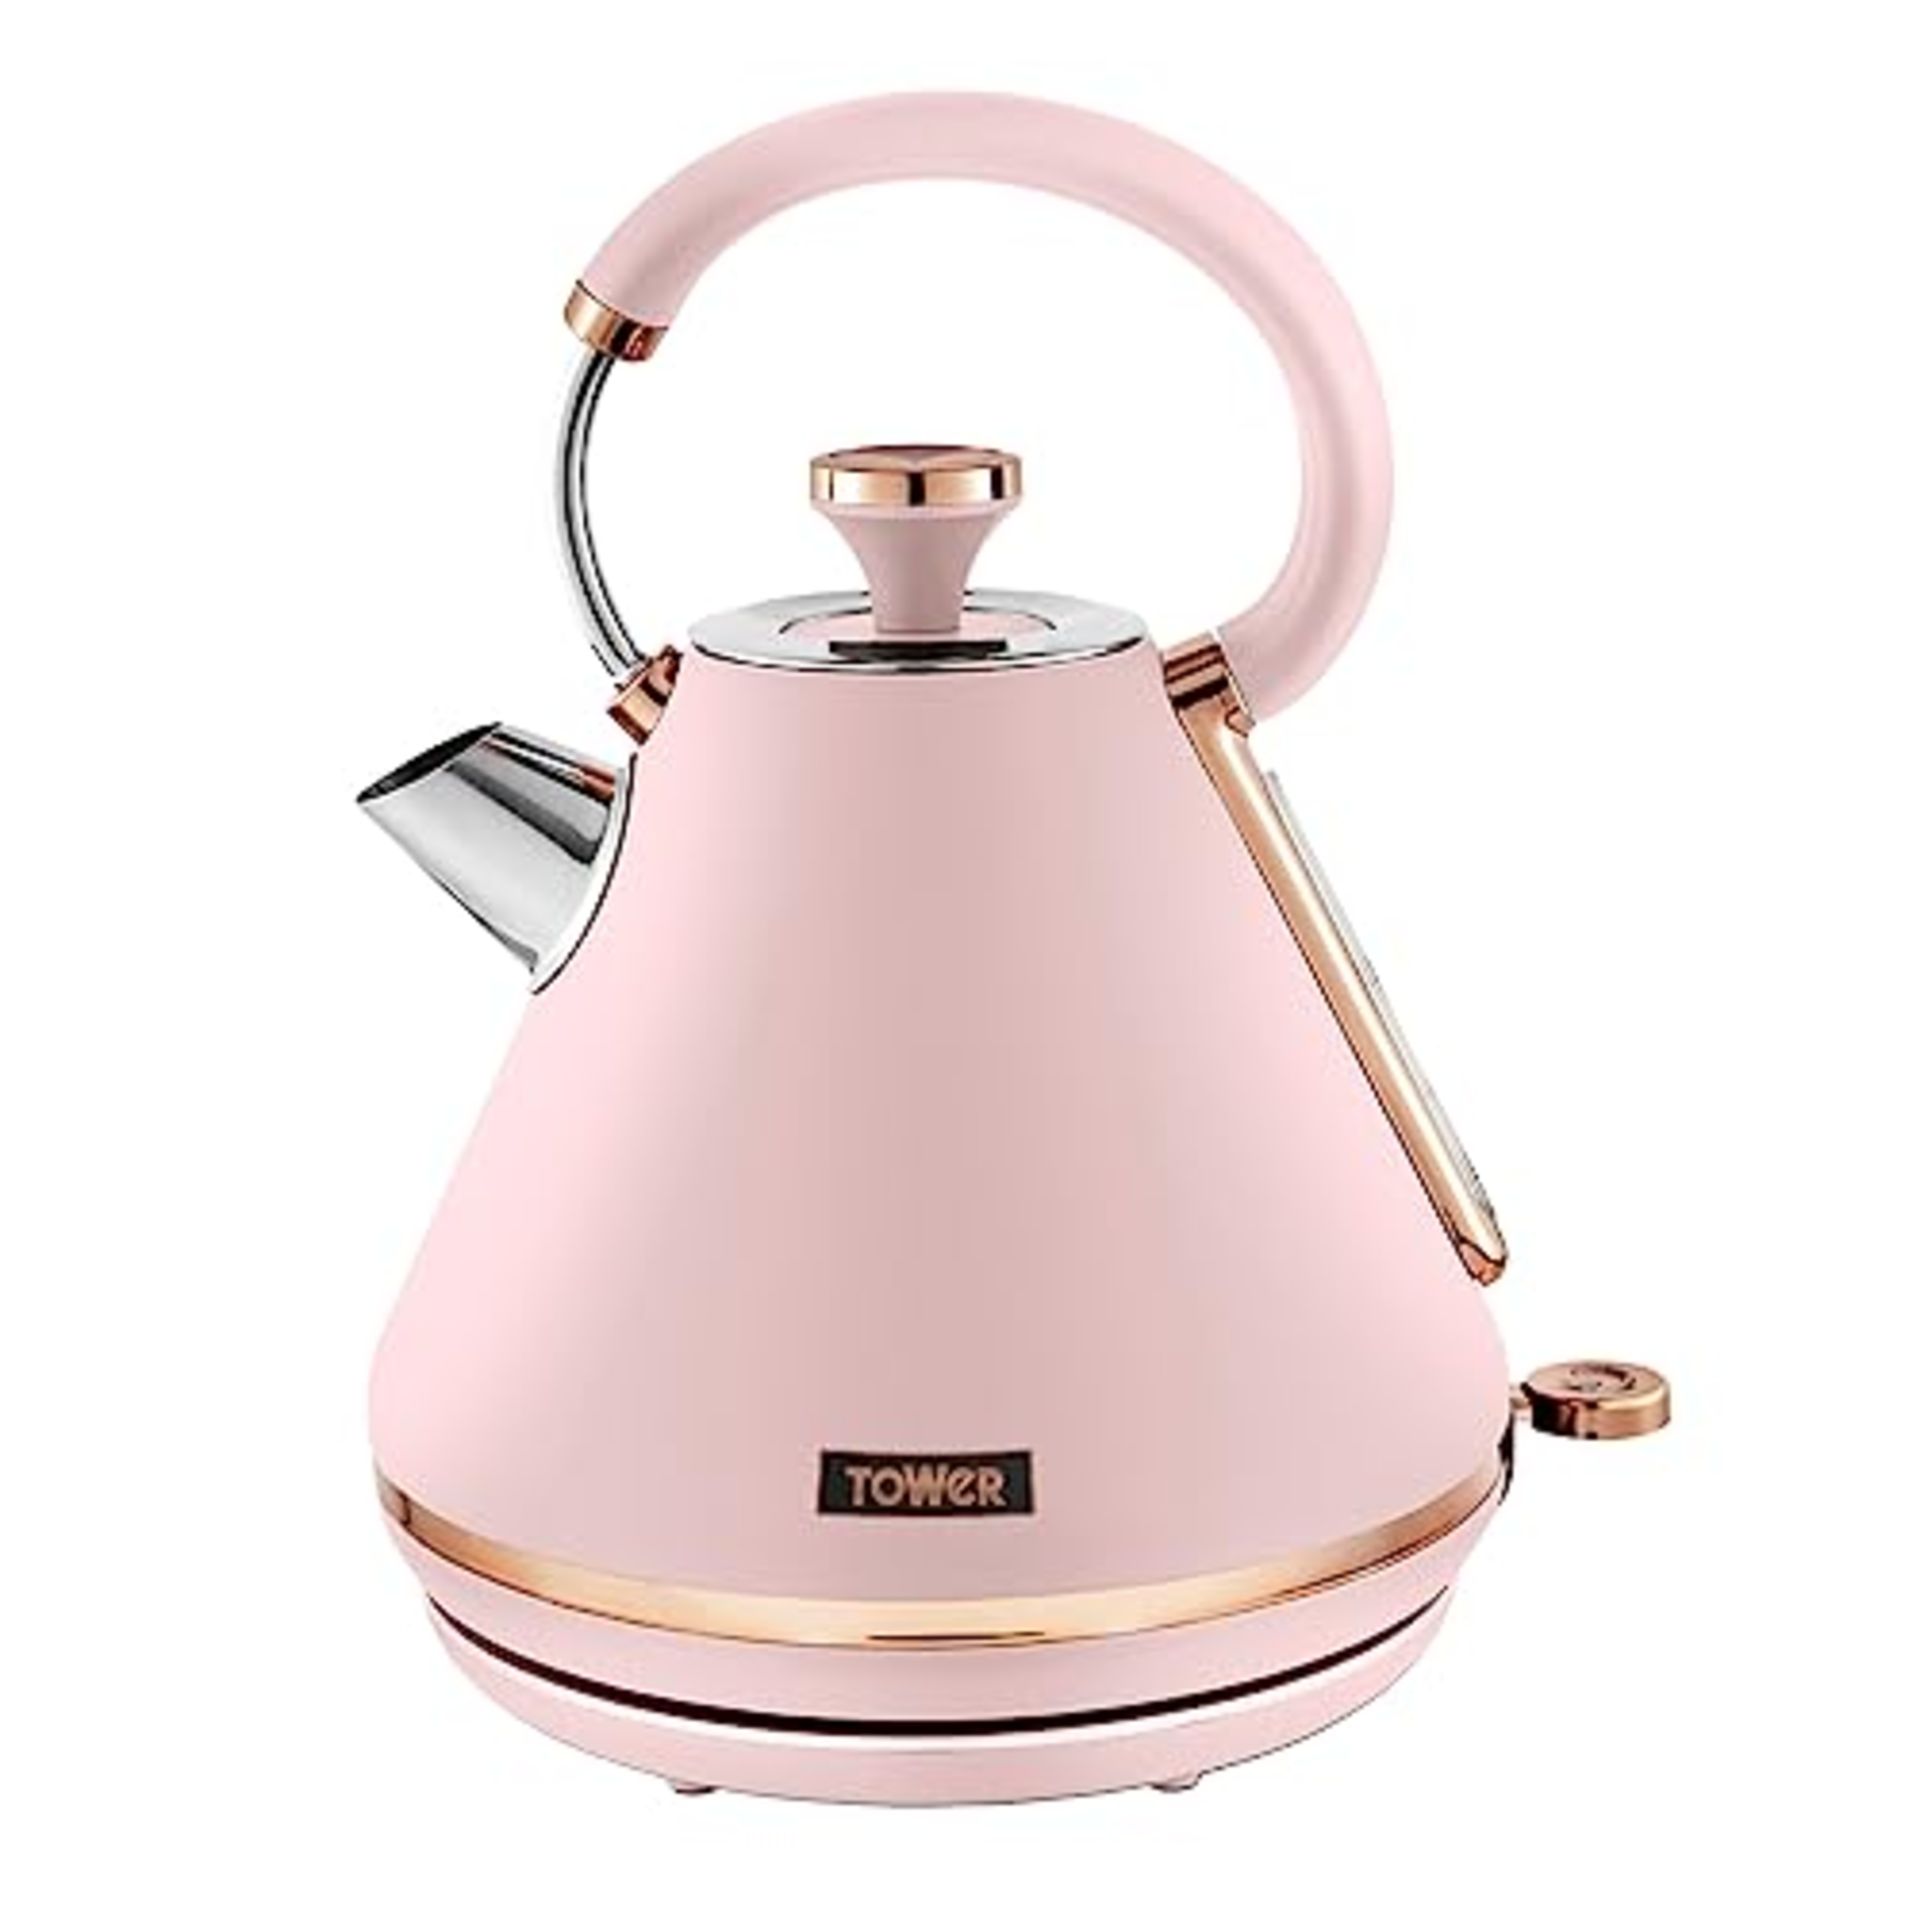 Tower T10044PNK Cavaletto Pyramid Kettle with Fast Boil, Detachable Filter, 1.7 Litre,